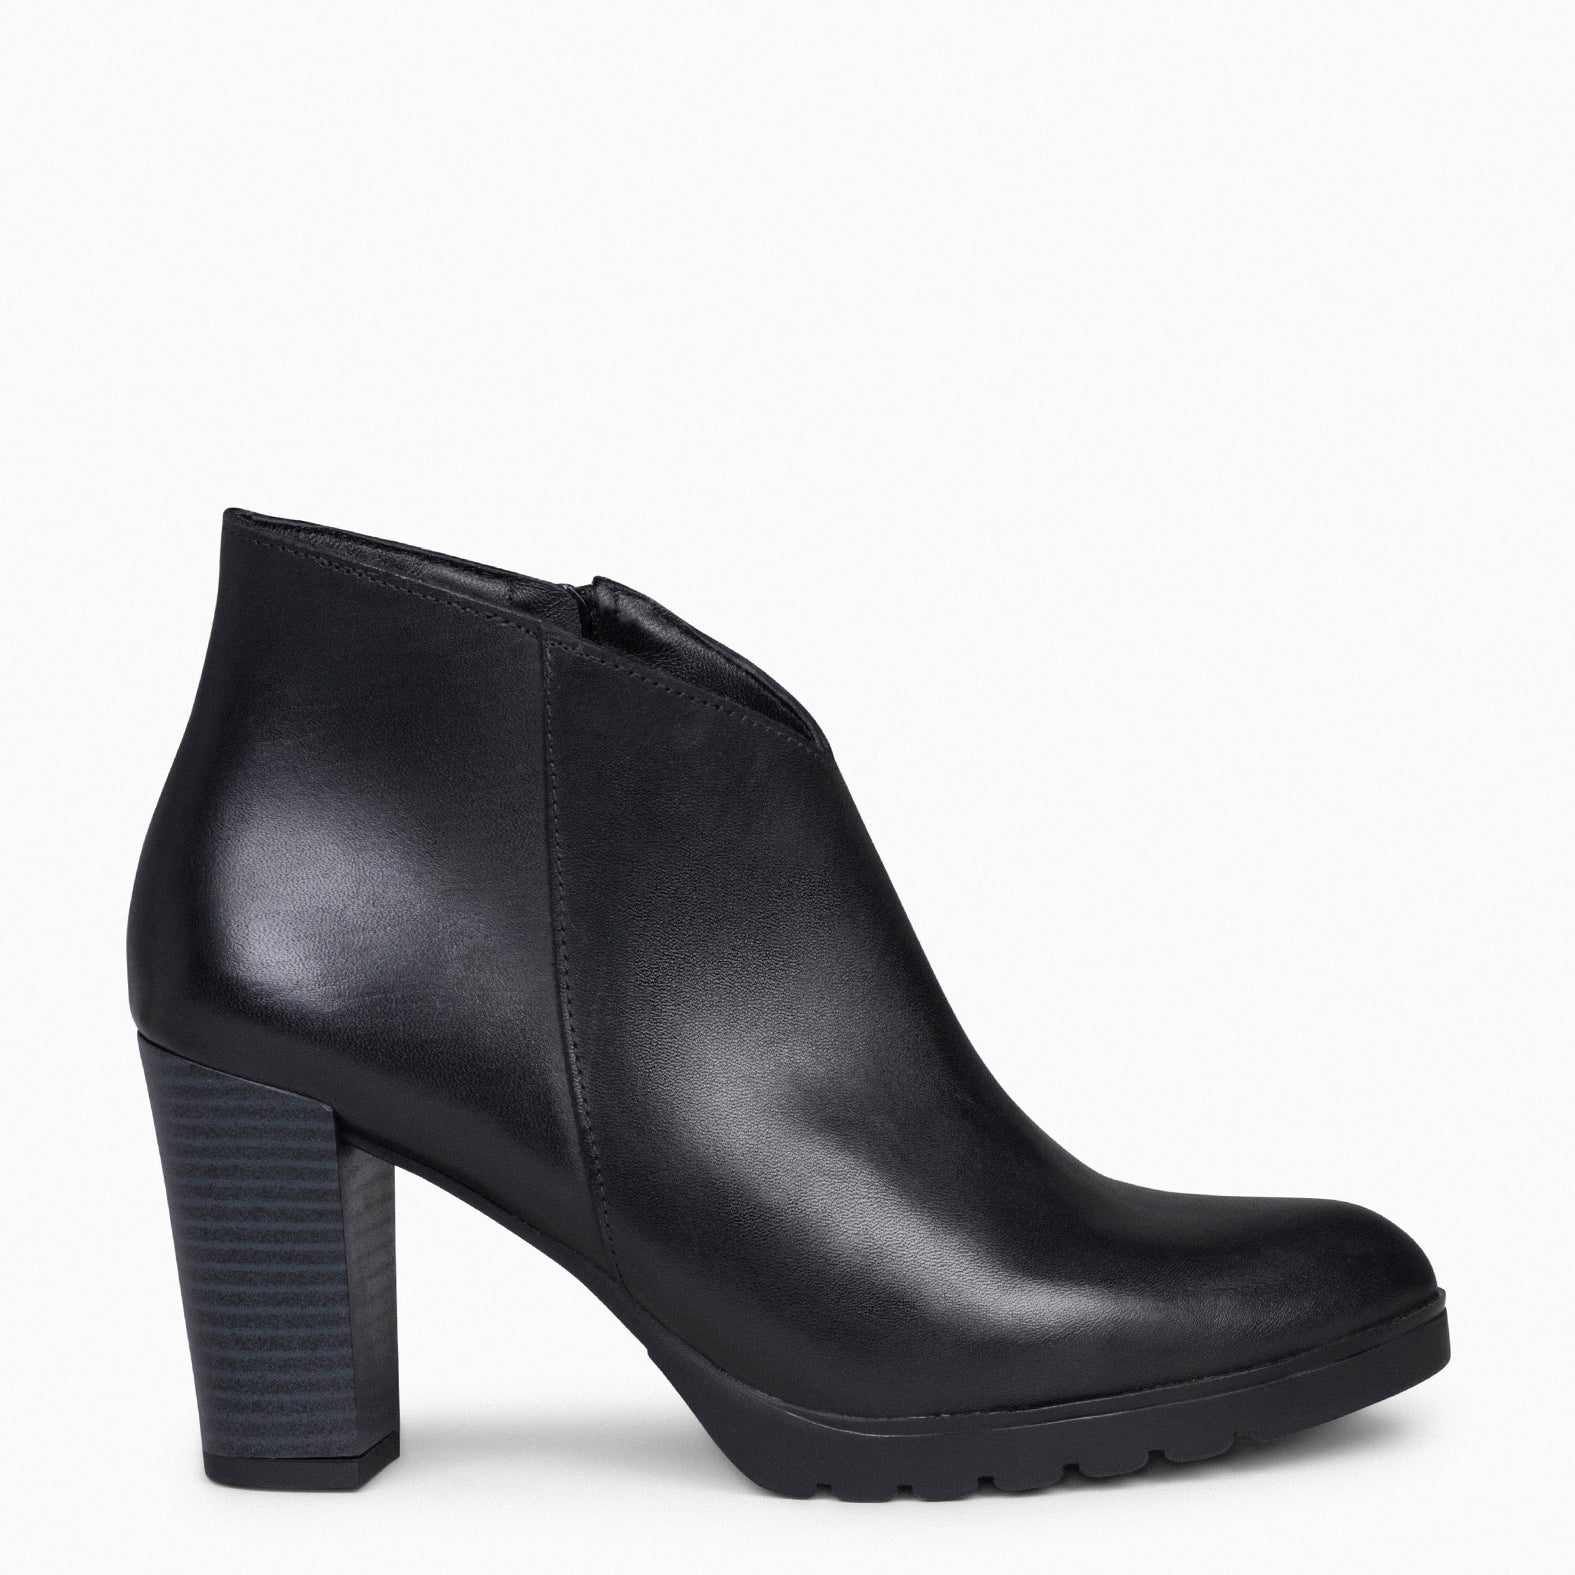 CLASSIC - BLACK Women's Ankle Boots with heel